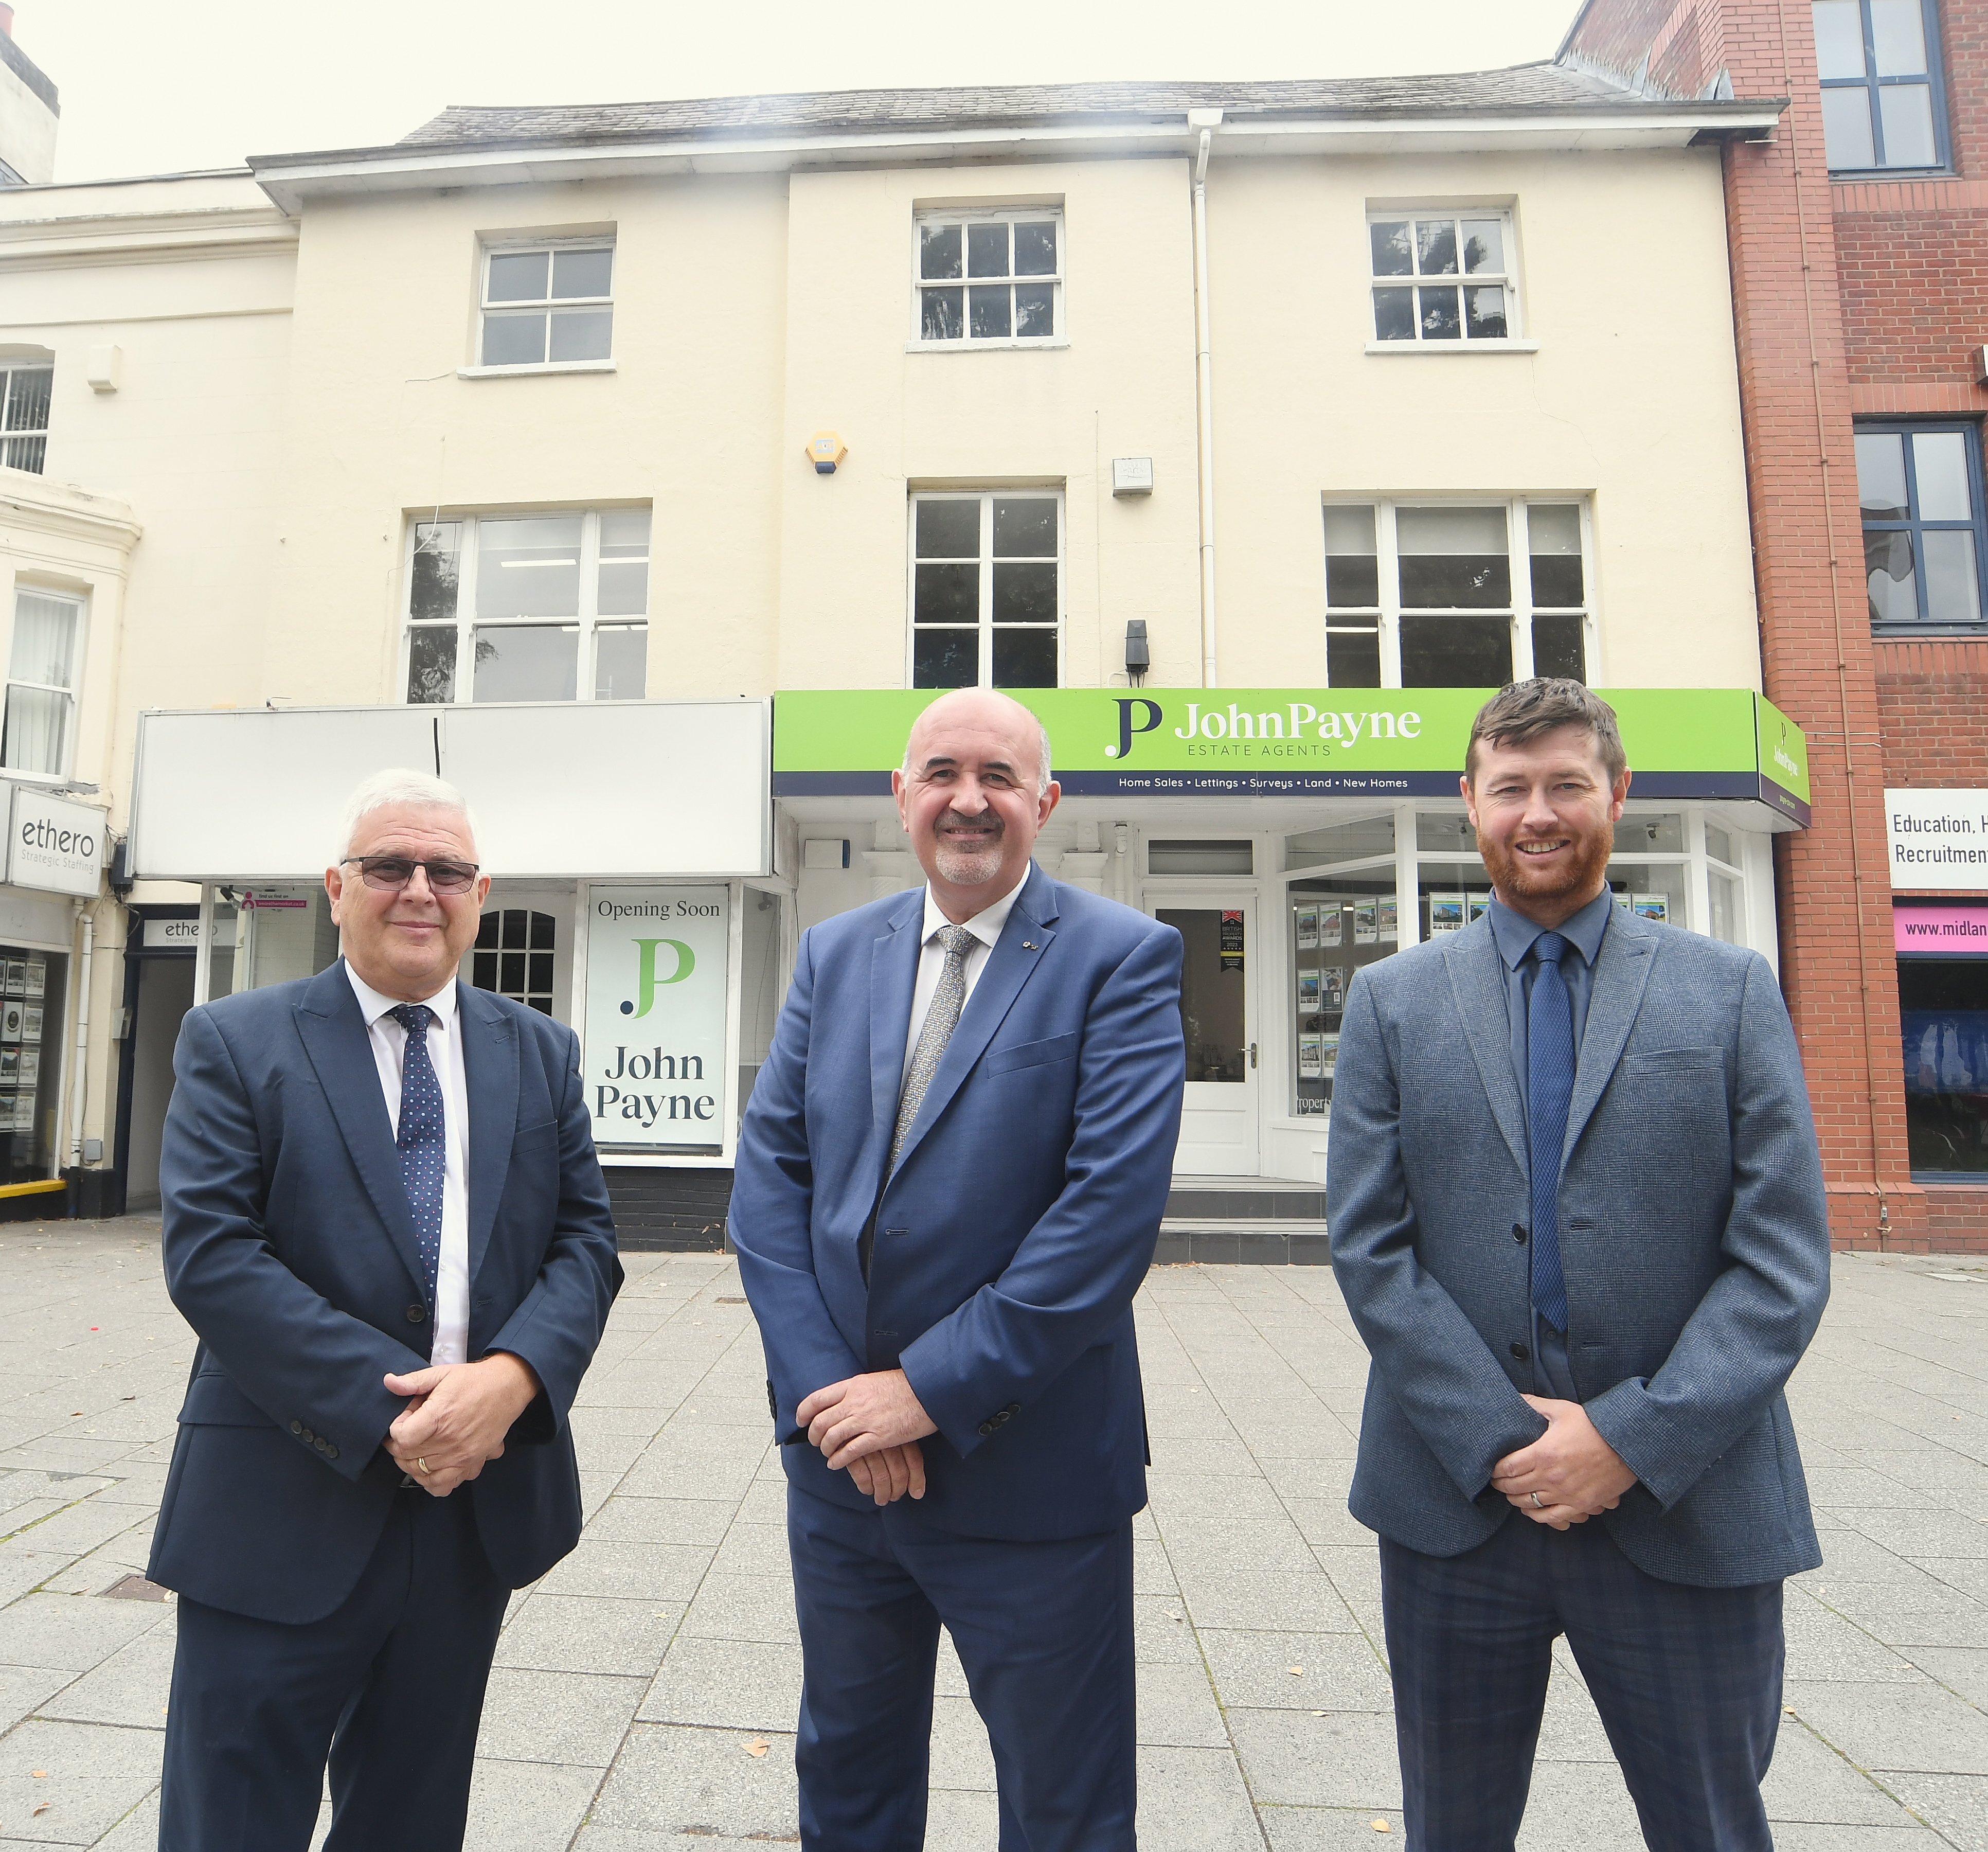 Coventry estate agents makes major investment into 'super office' in historic city centre building